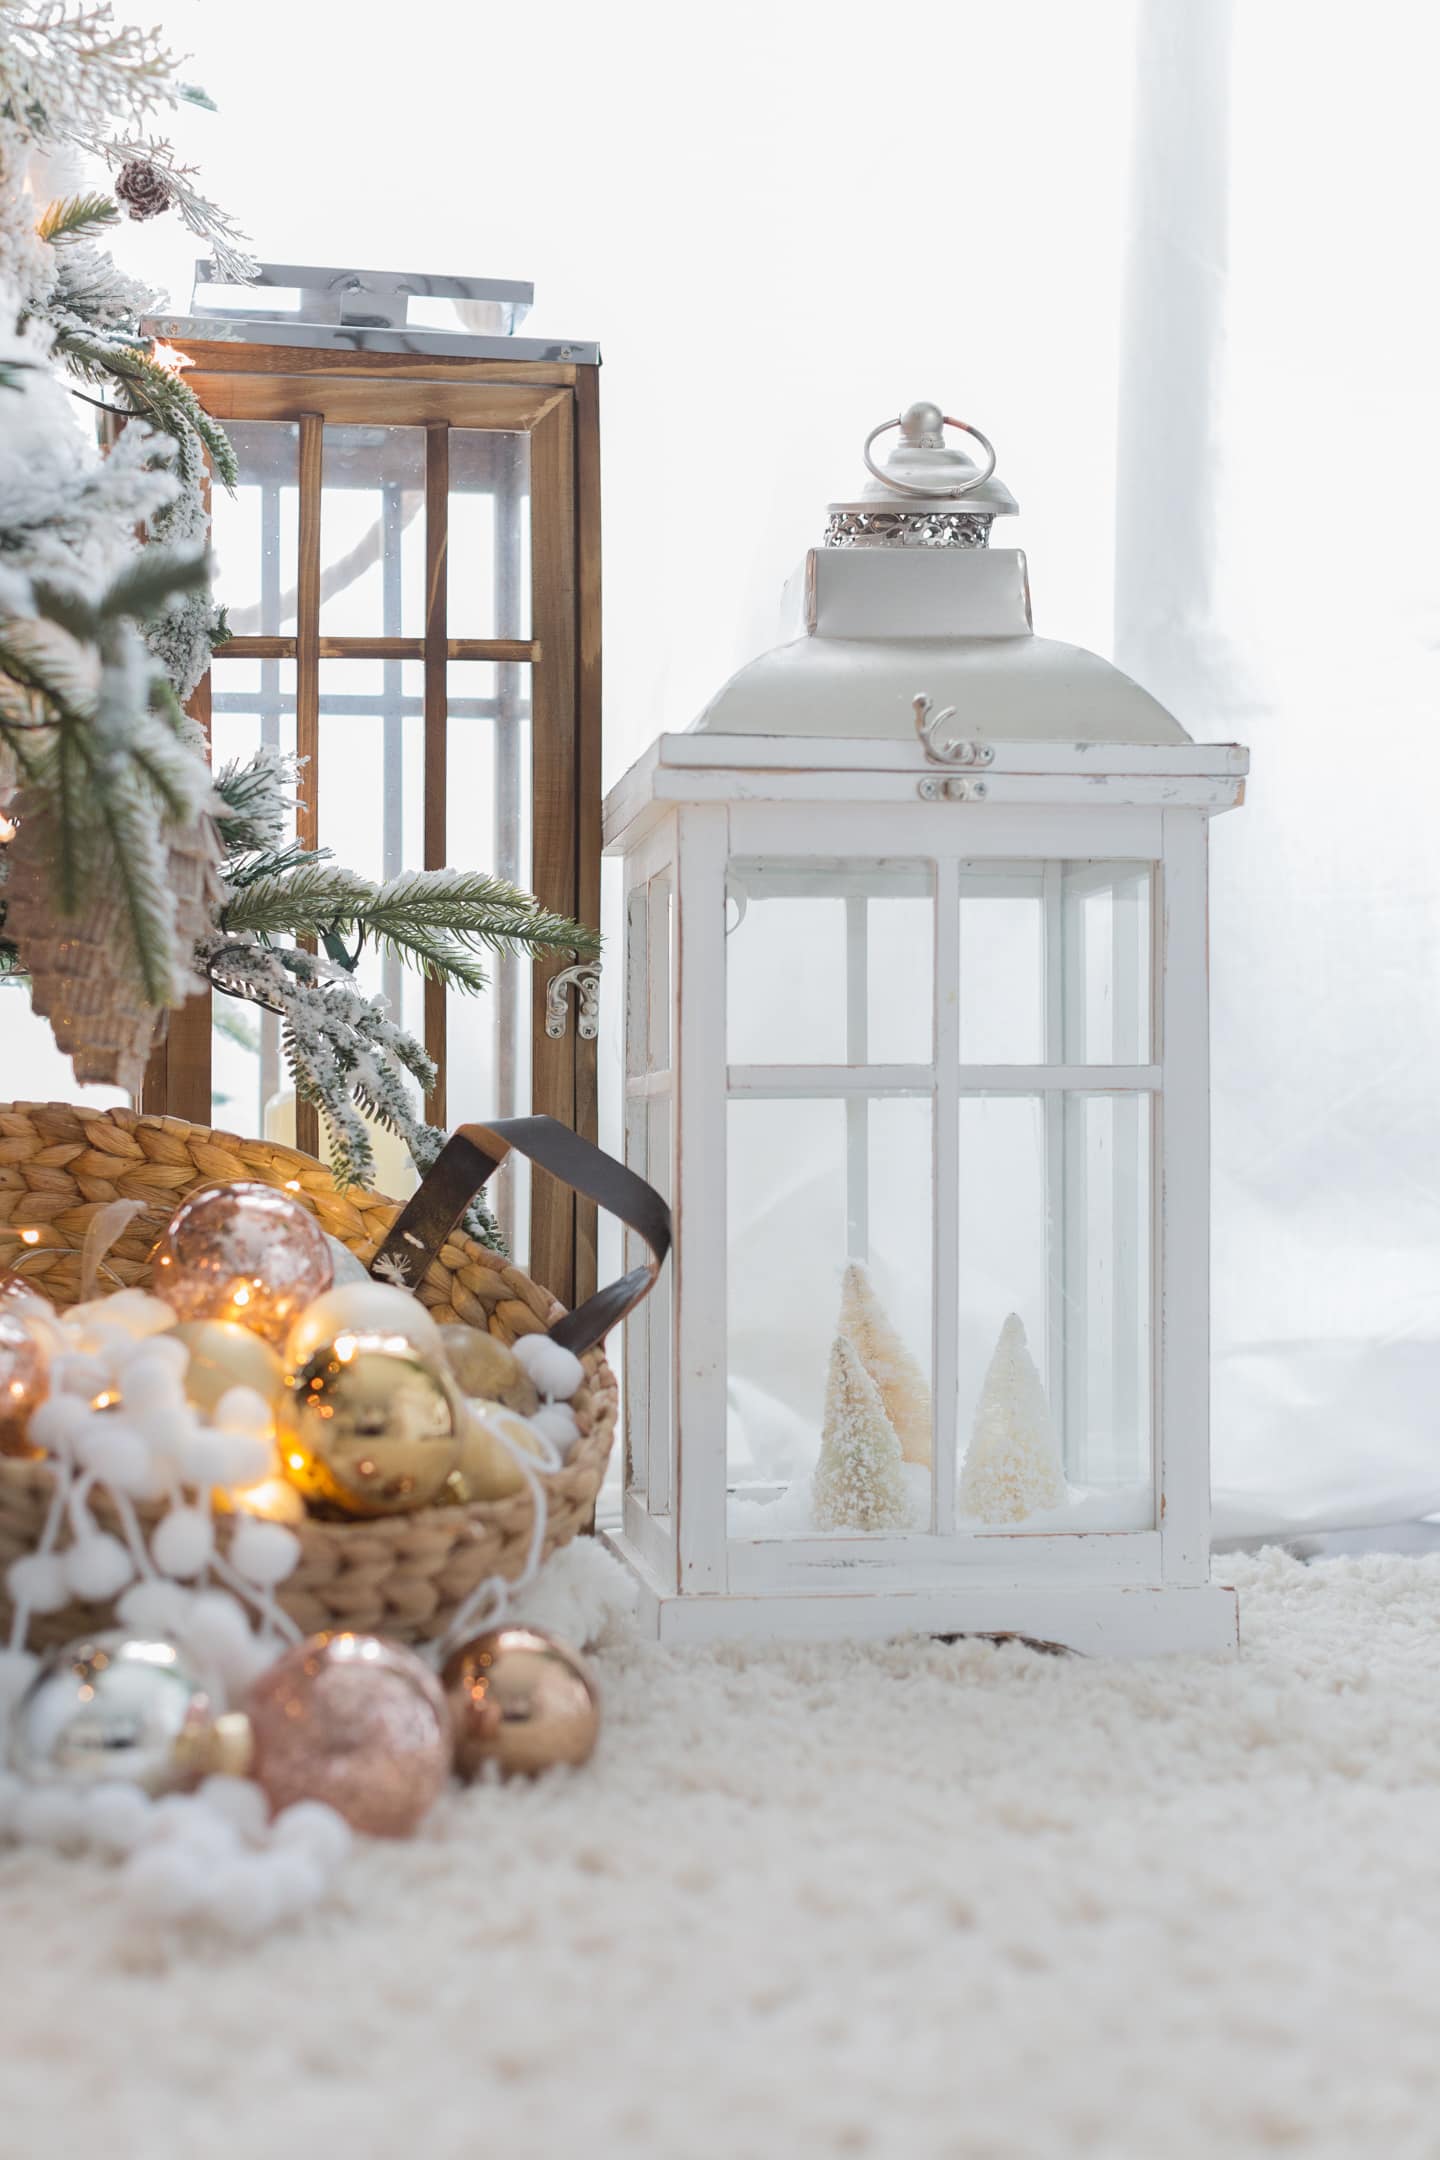 Christmas tree idea featuring a base cover next to a lantern all in white shades